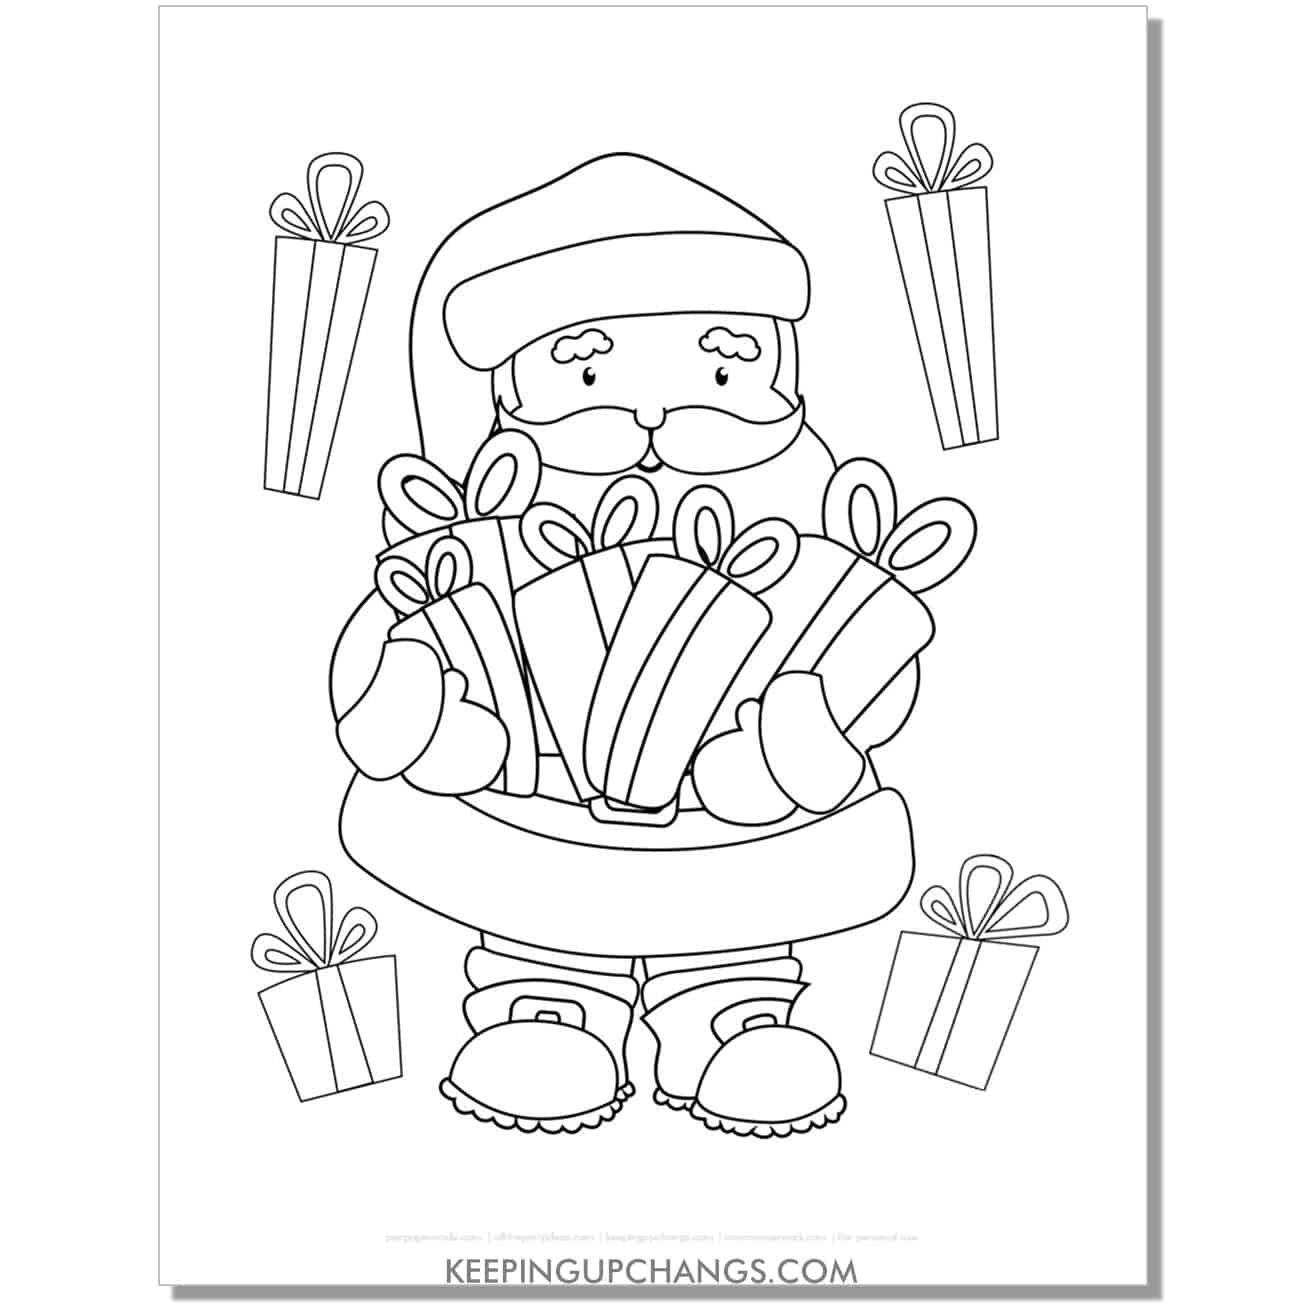 free adorable santa holding gifts, presents coloring page.